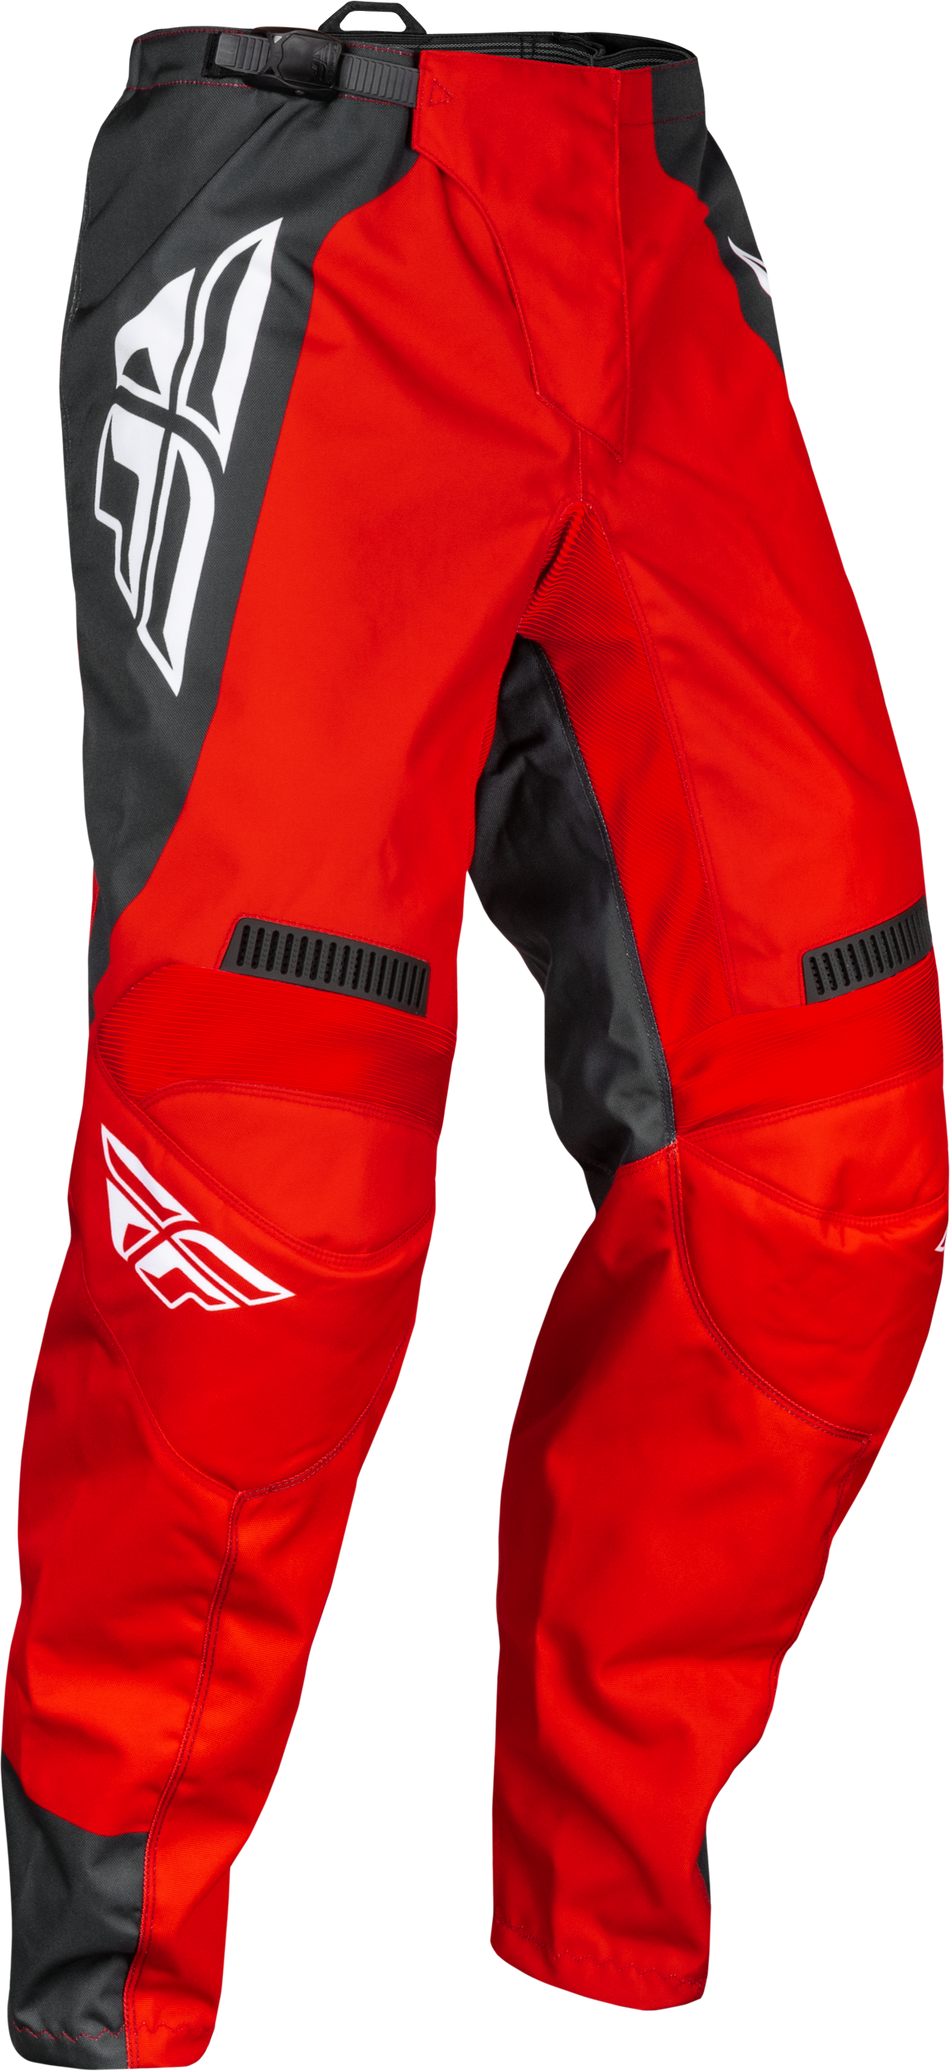 FLY RACING F-16 Pants Red/Charcoal/White Sz 30 377-93330